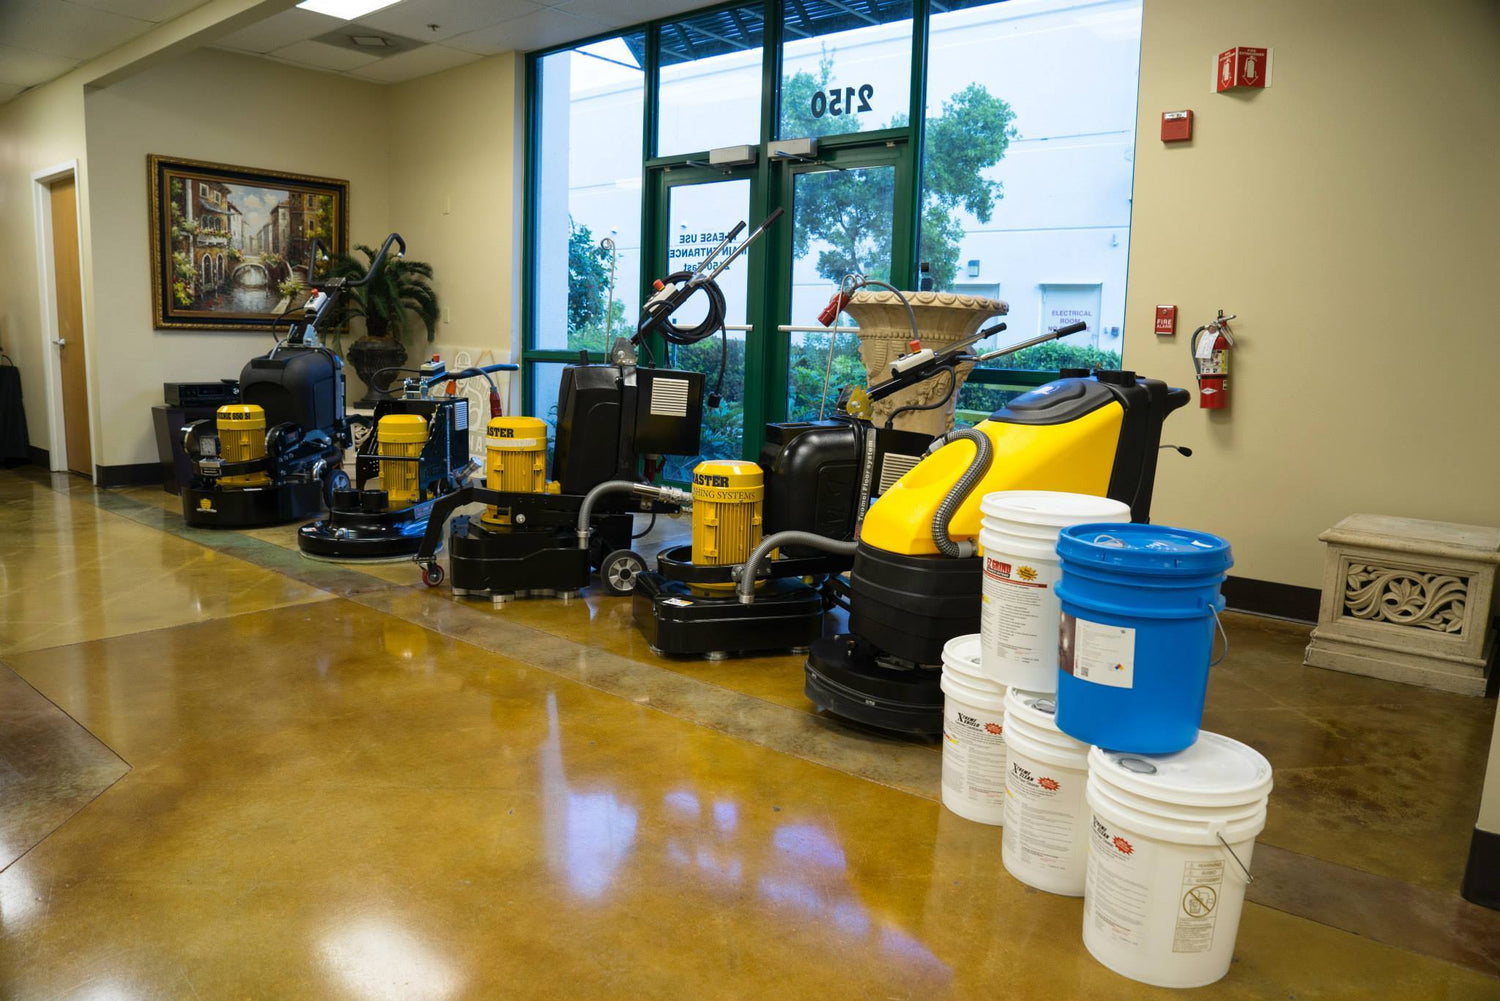 What are the Benefits of Using Concrete Polishing Machines and Supplies? - Xtreme Polishing Systems